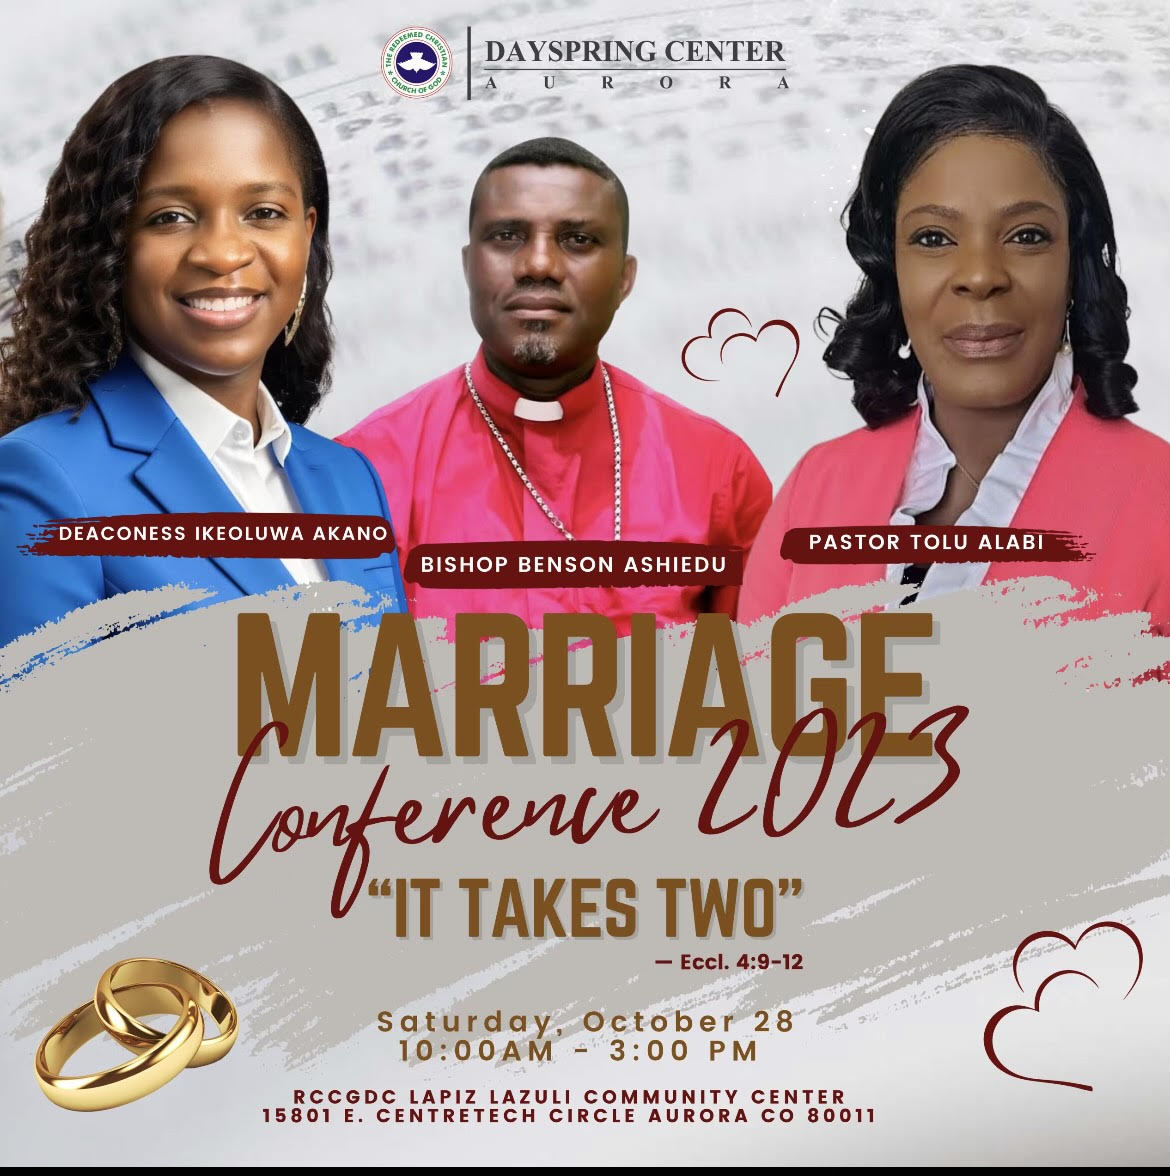 RCCG DC - MARRIAGE CONFERENCE 2023